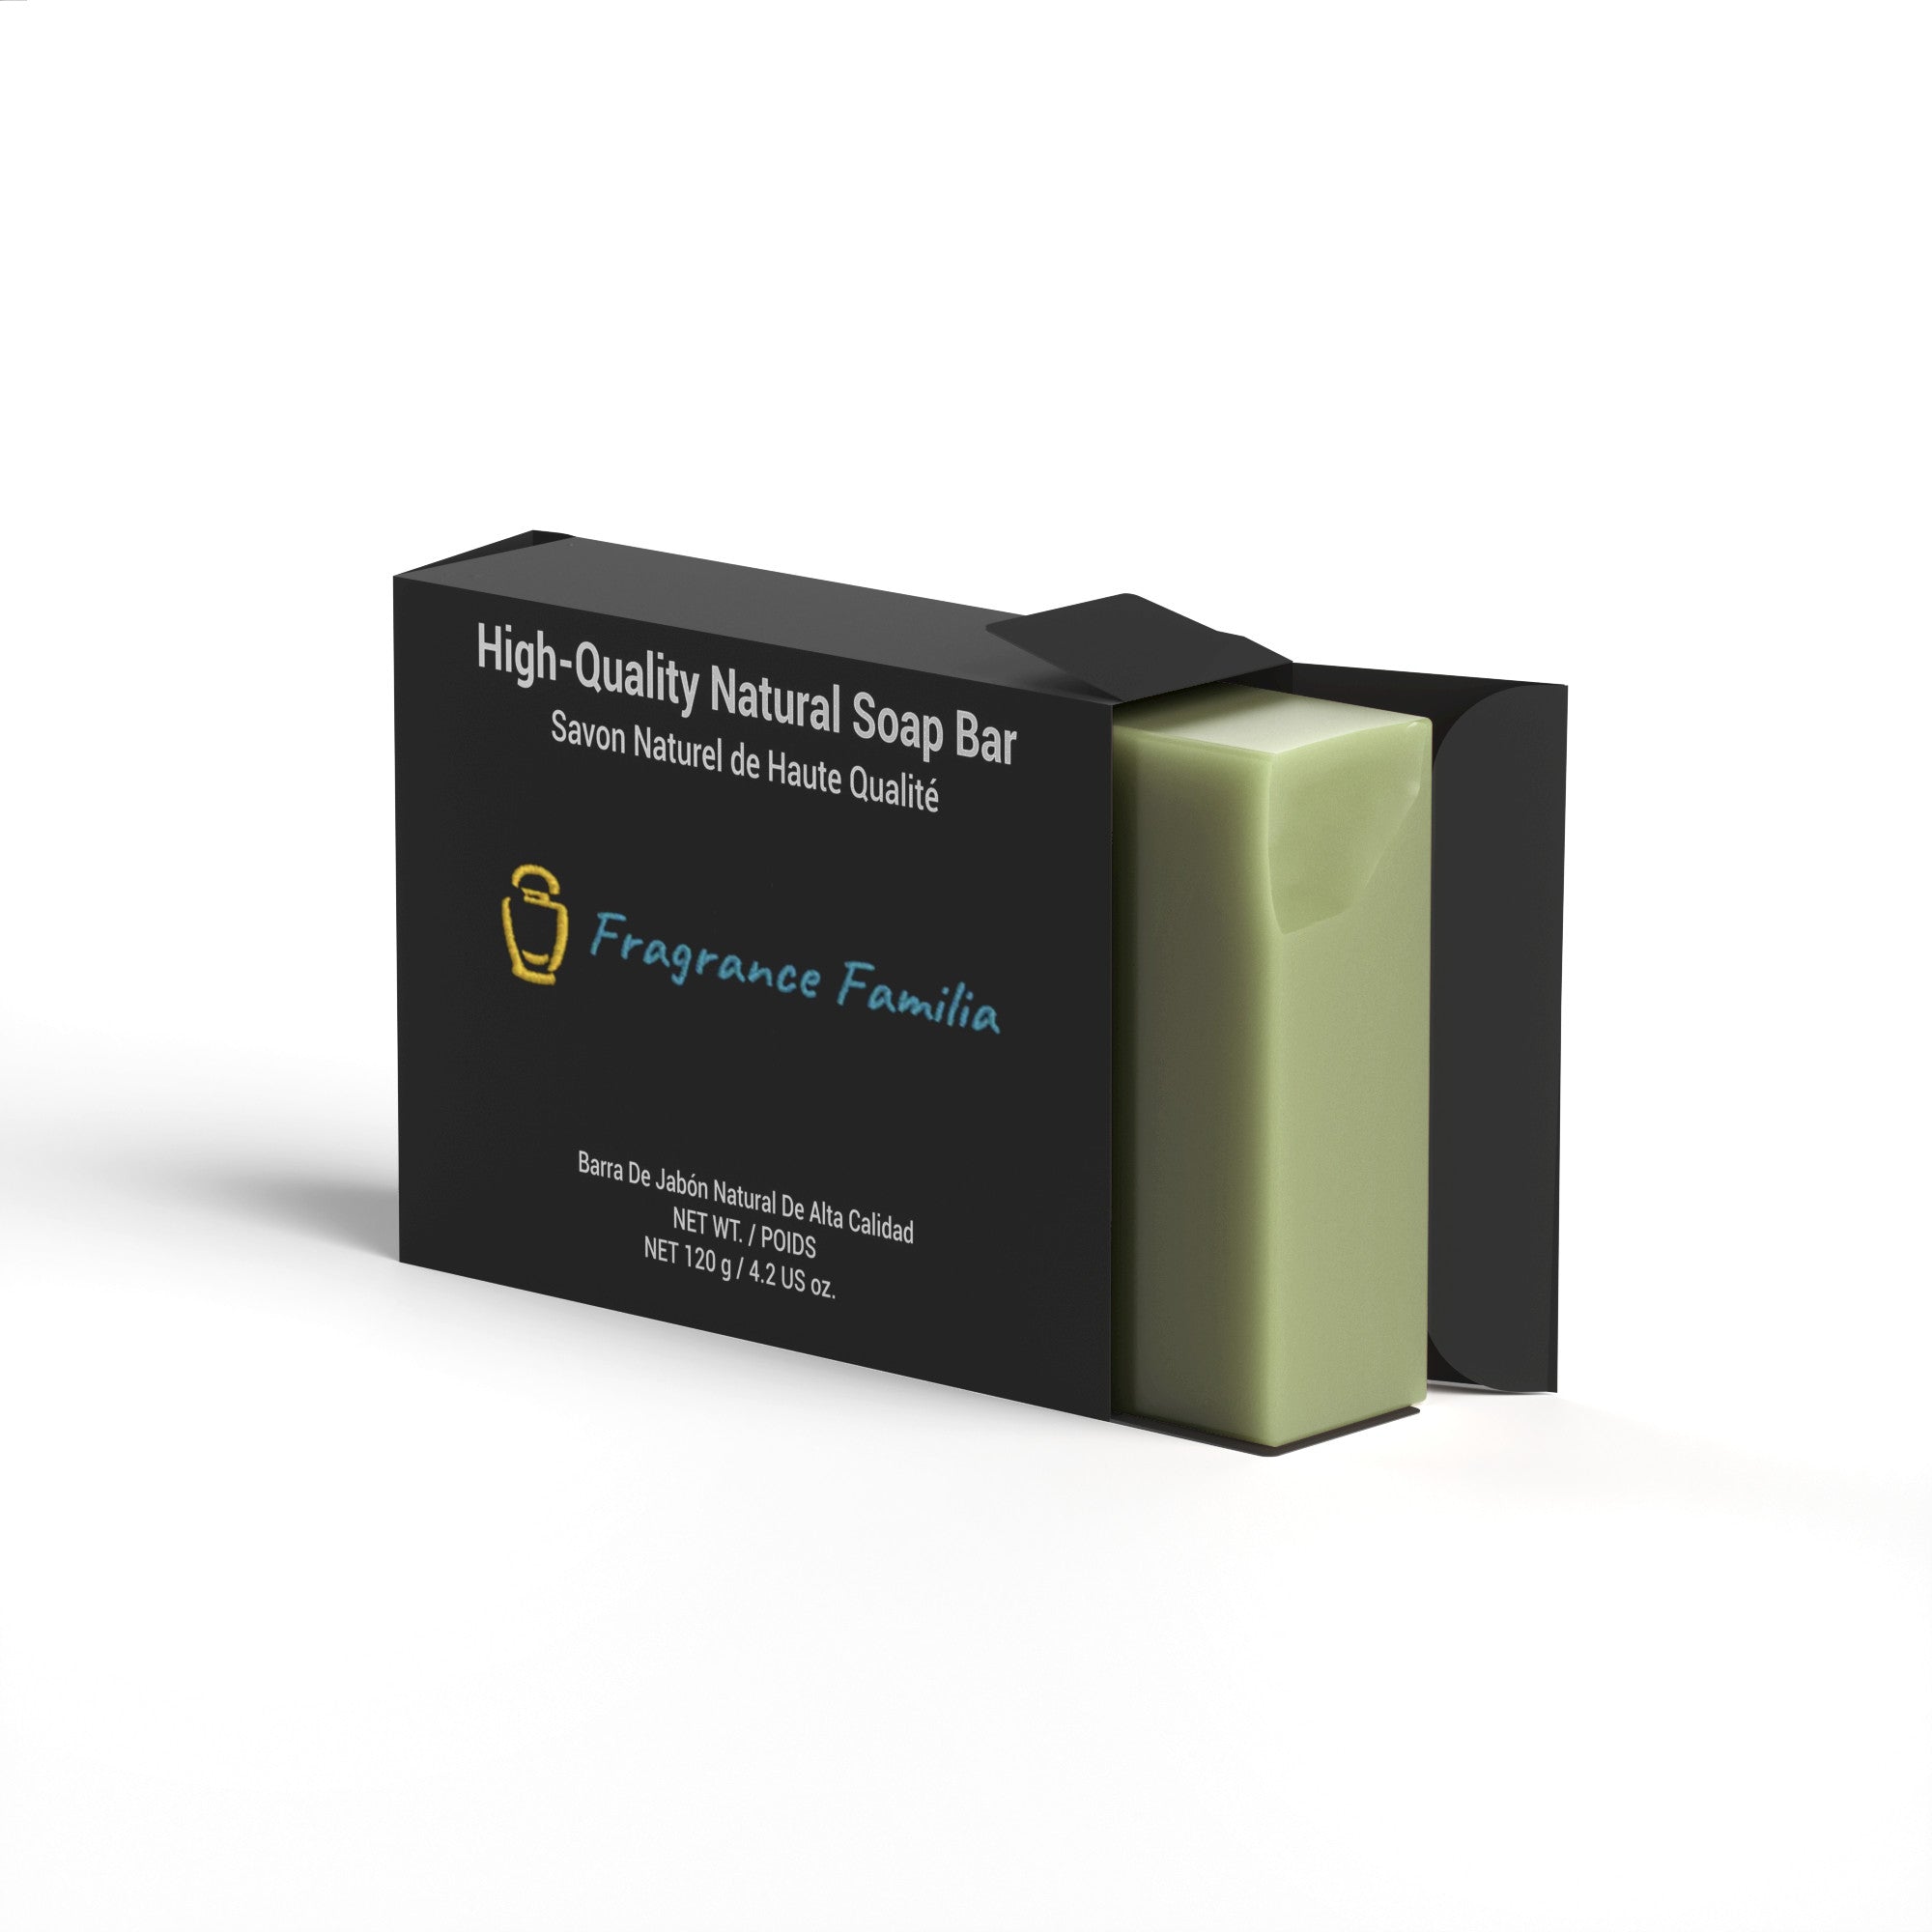 a bar of fragrance familia's organic neem basil soap contained in packaging